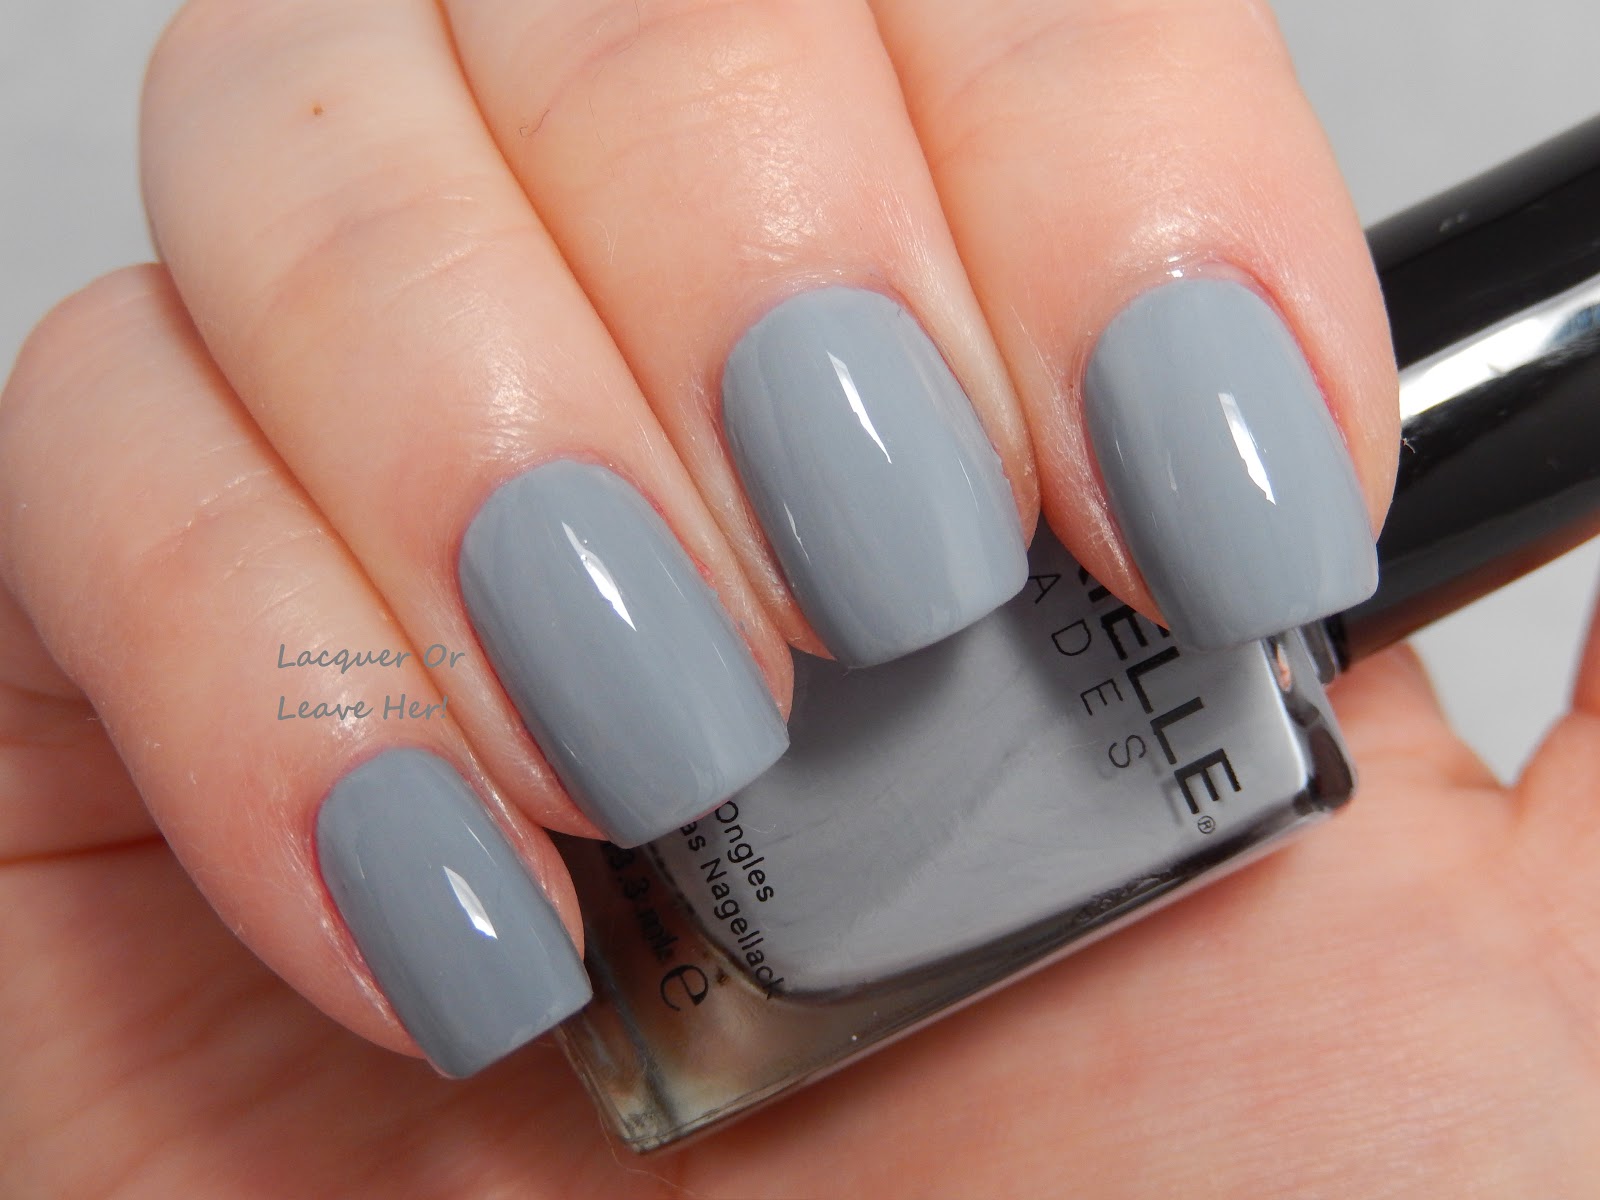 Lacquer or Leave Her!: Review: Barielle Vibrants collection